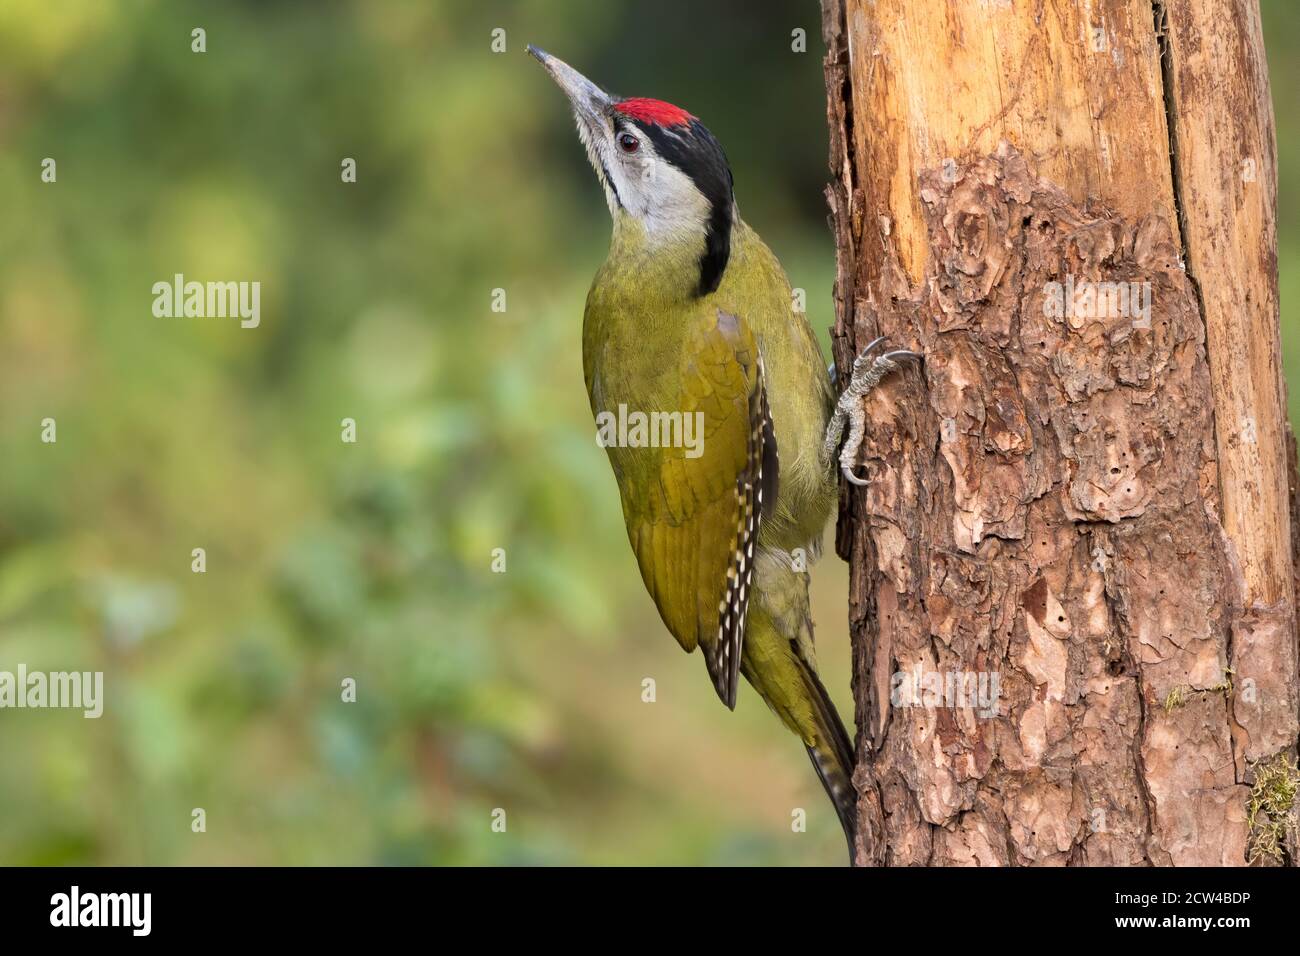 A beautiful male Grey-headed woodpecker (Picus canus), holding onto the side of a tree trunk in Sattal - Uttarakhand in India. Stock Photo